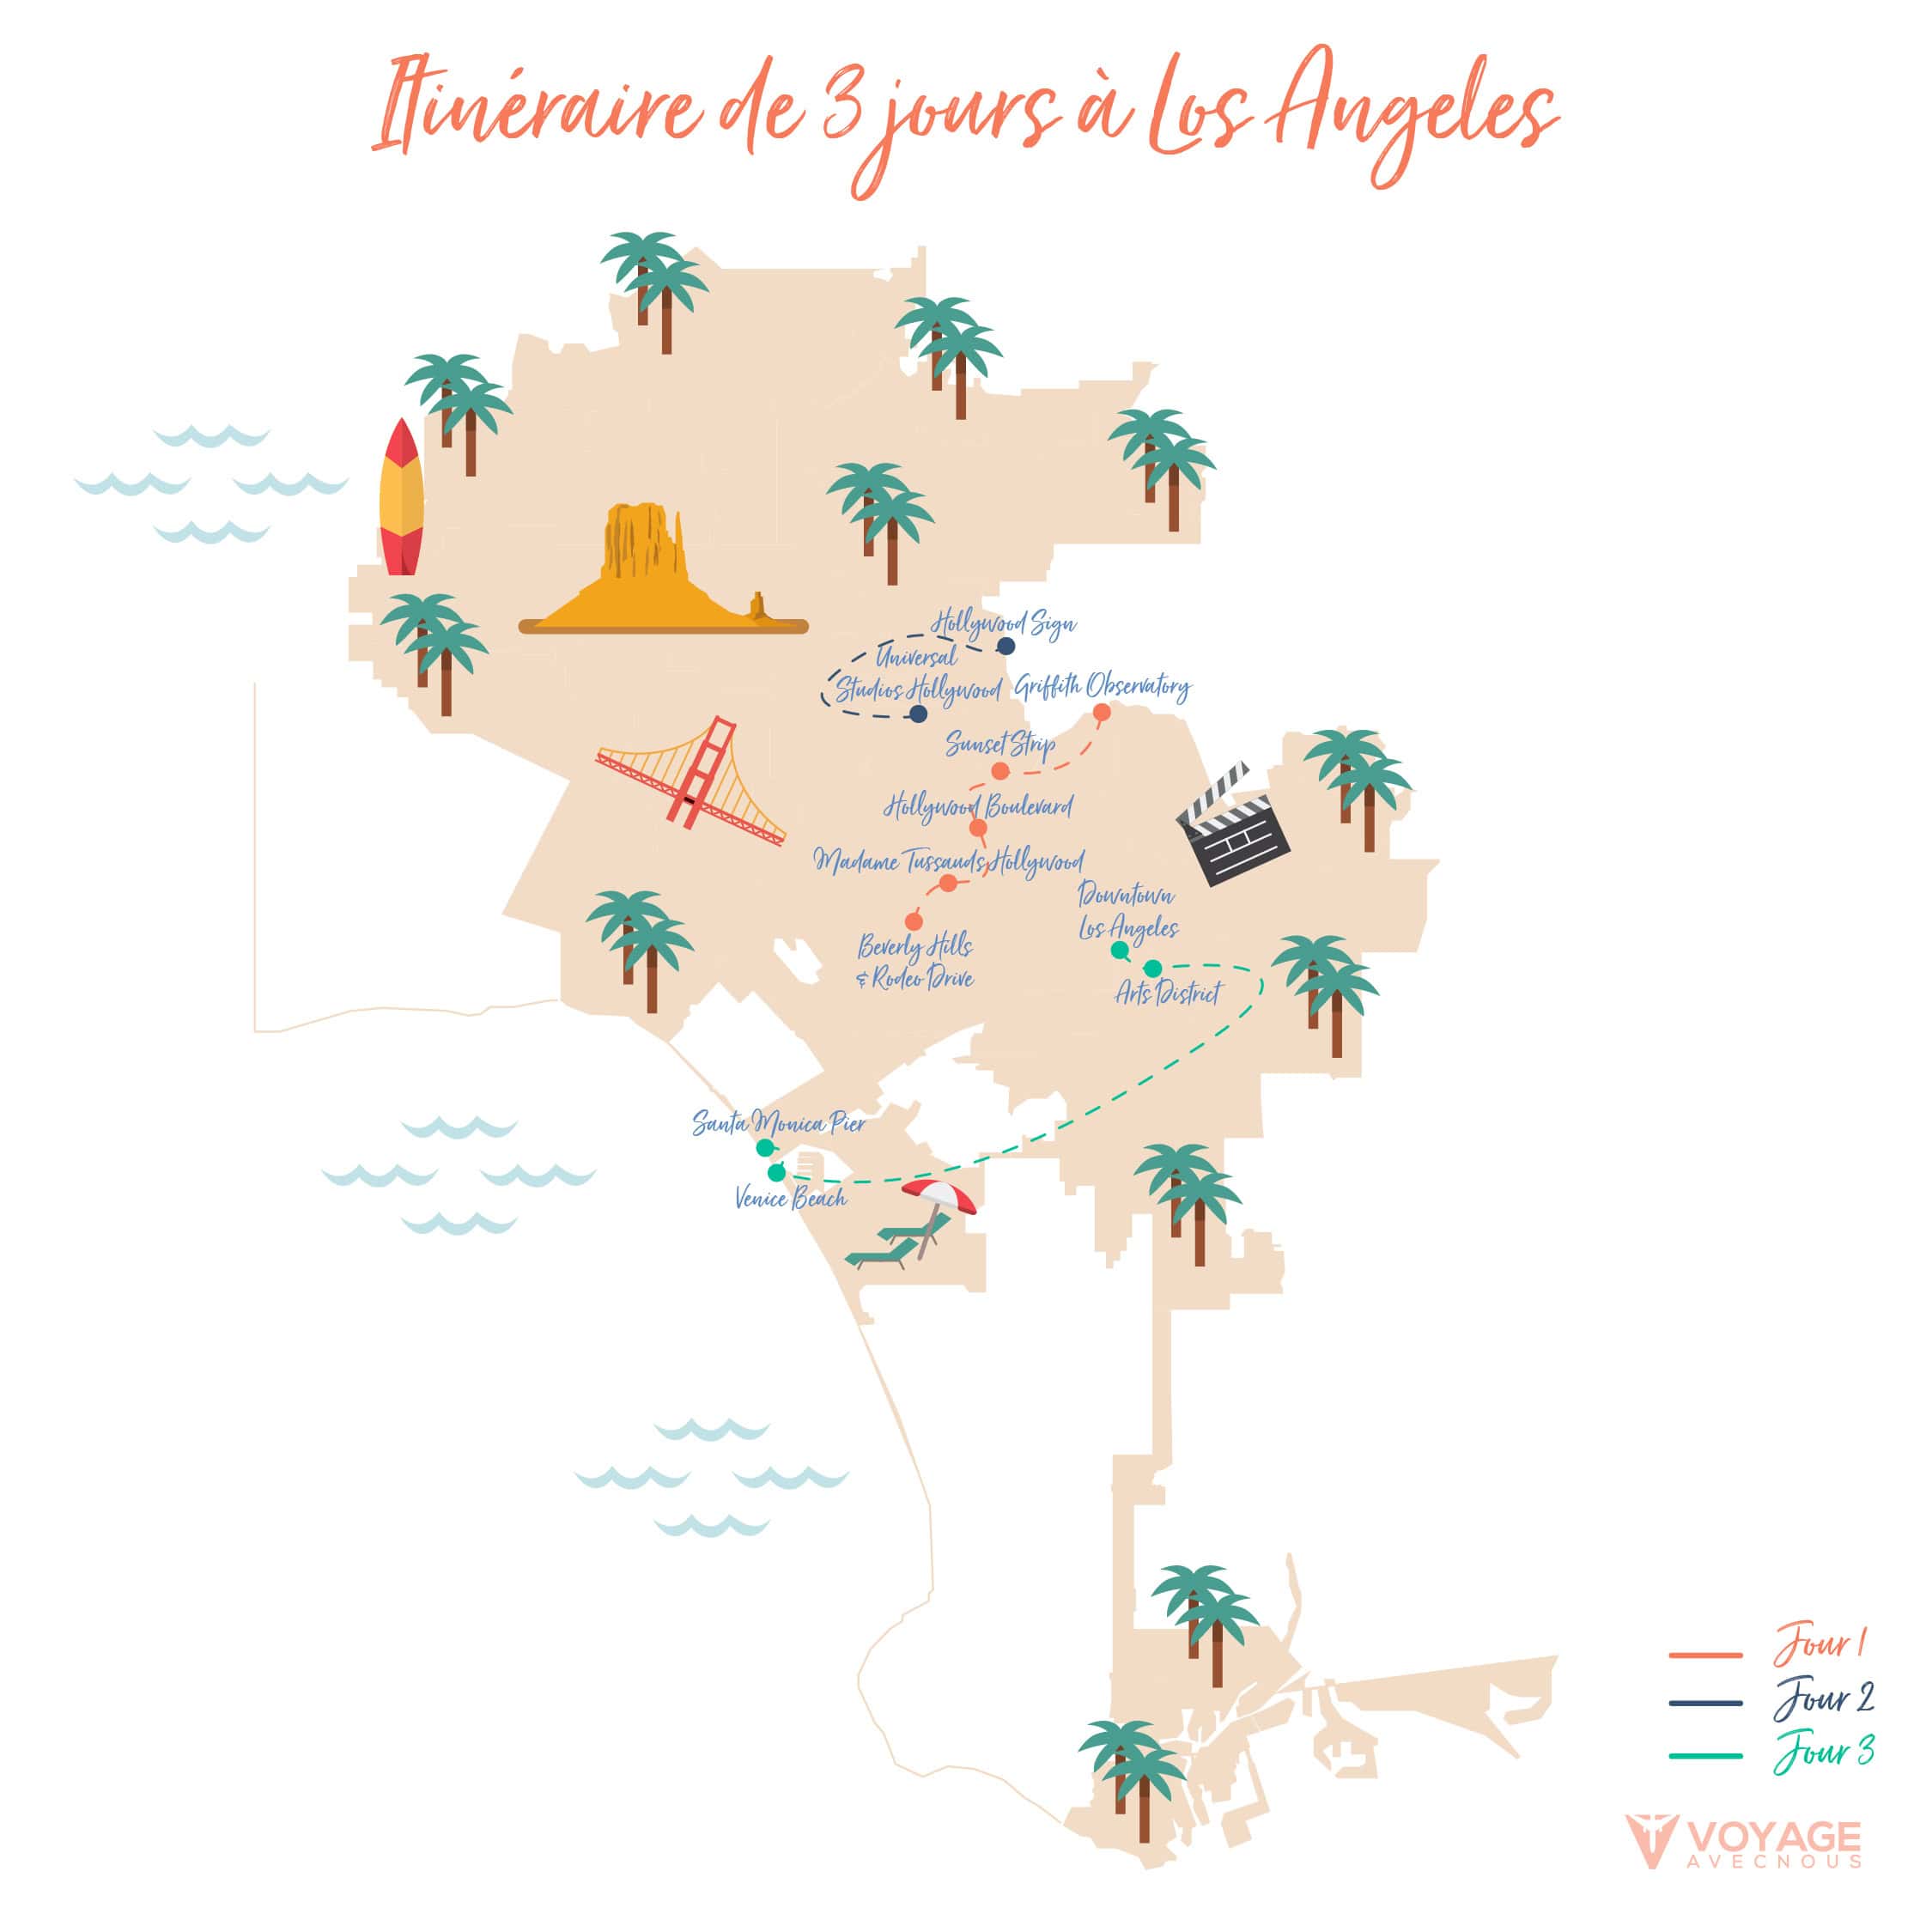 itineraire los angeles 3 jours